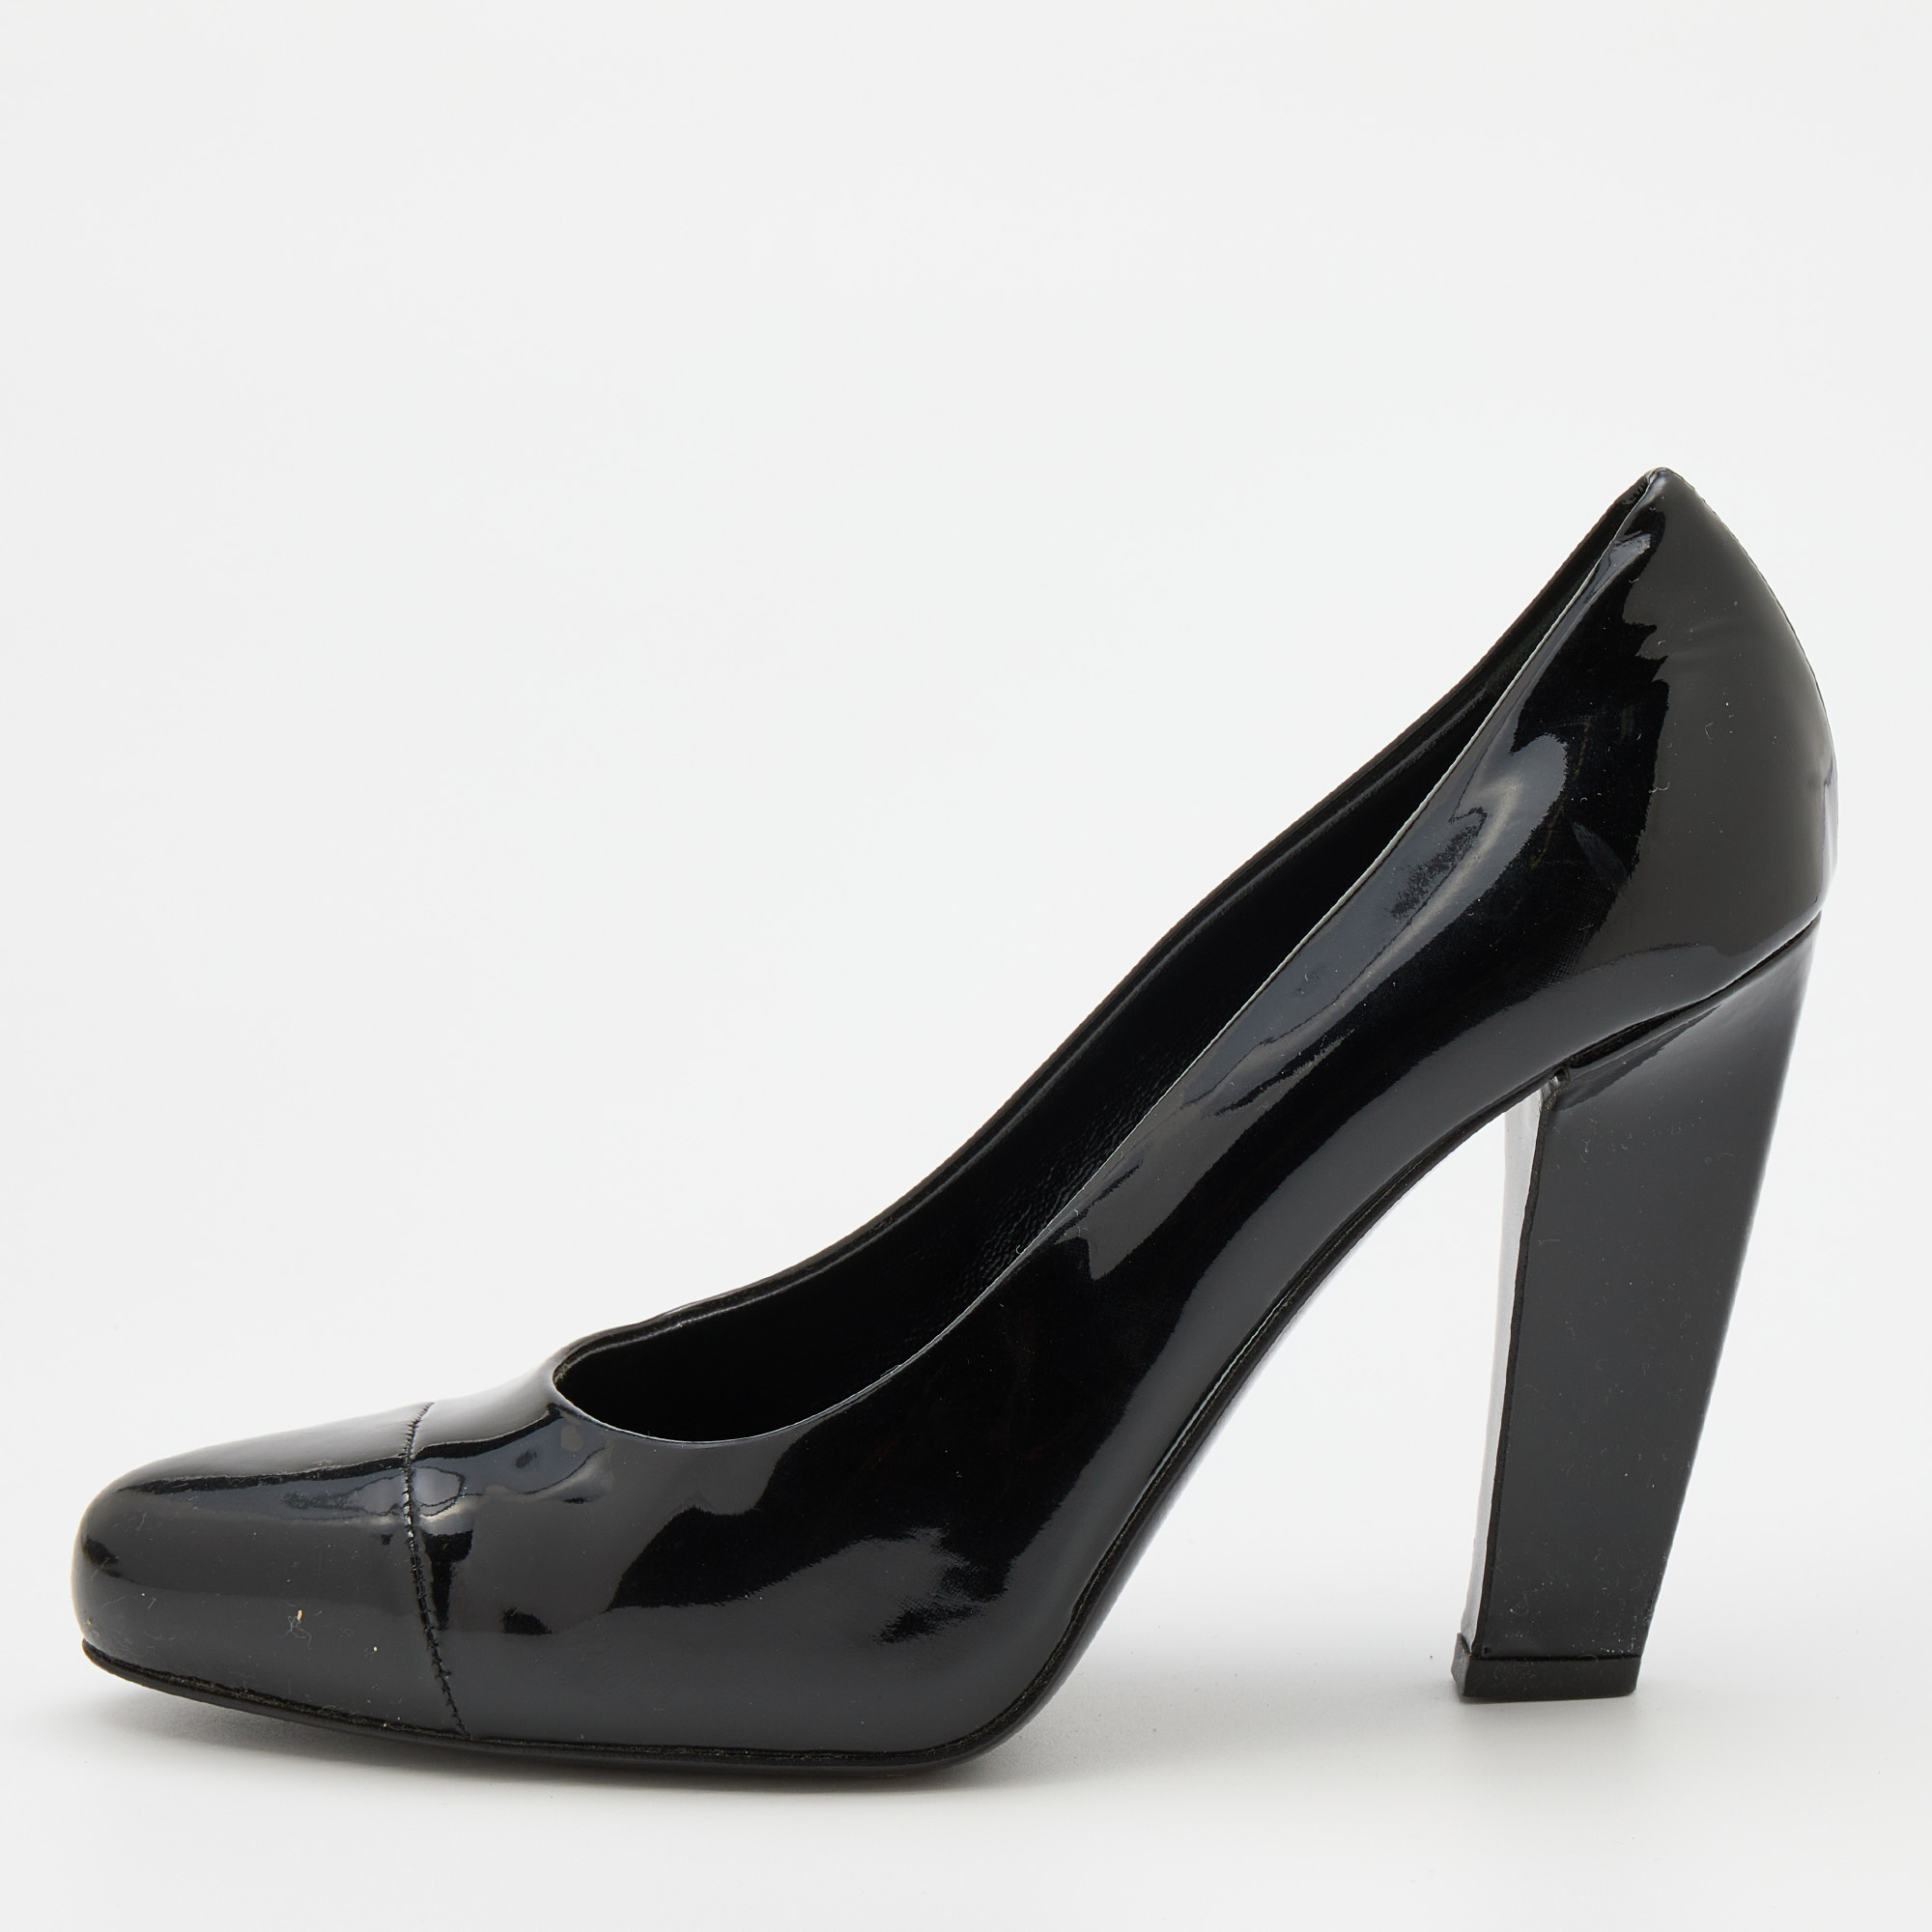 Designed for fashion queens like you these Prada pumps are crafted from patent leather and are absolutely gorgeous They come flaunting cap toes high heels and sturdy soles.